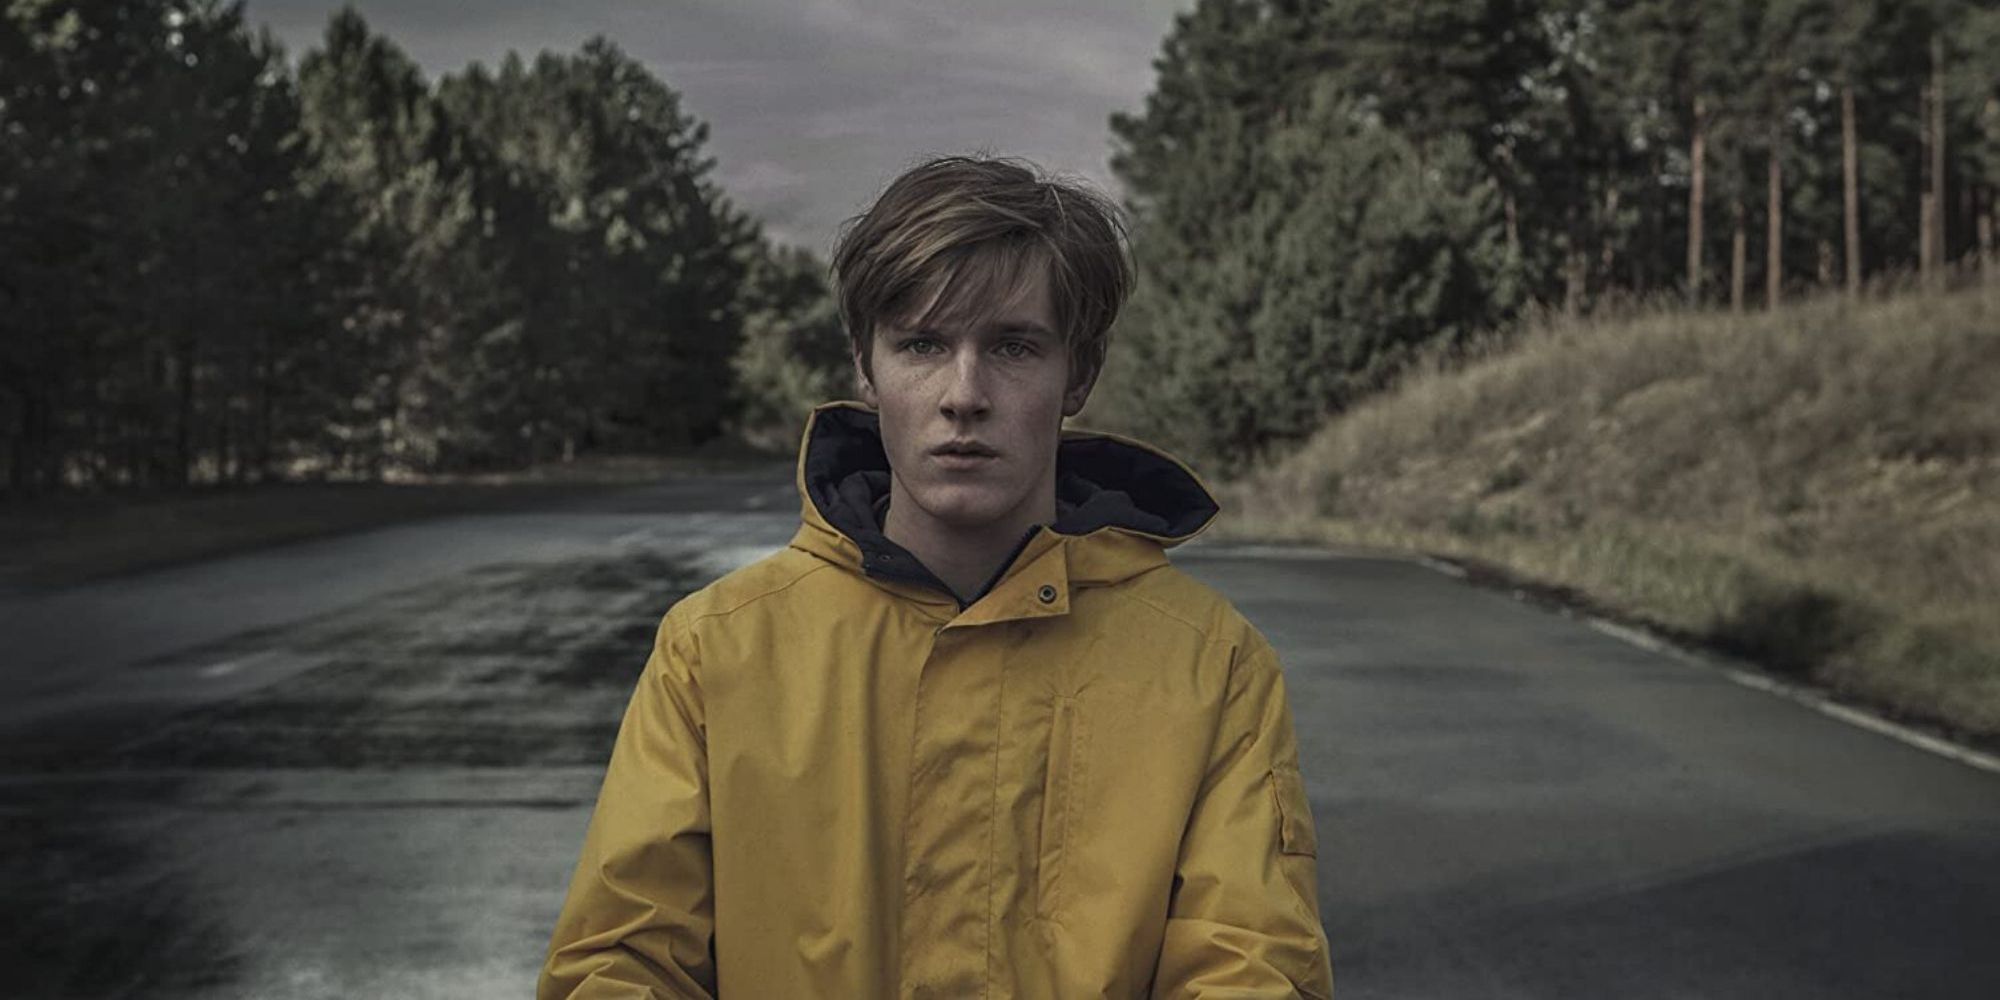 A young man in a raincoat stands on a road in Dark